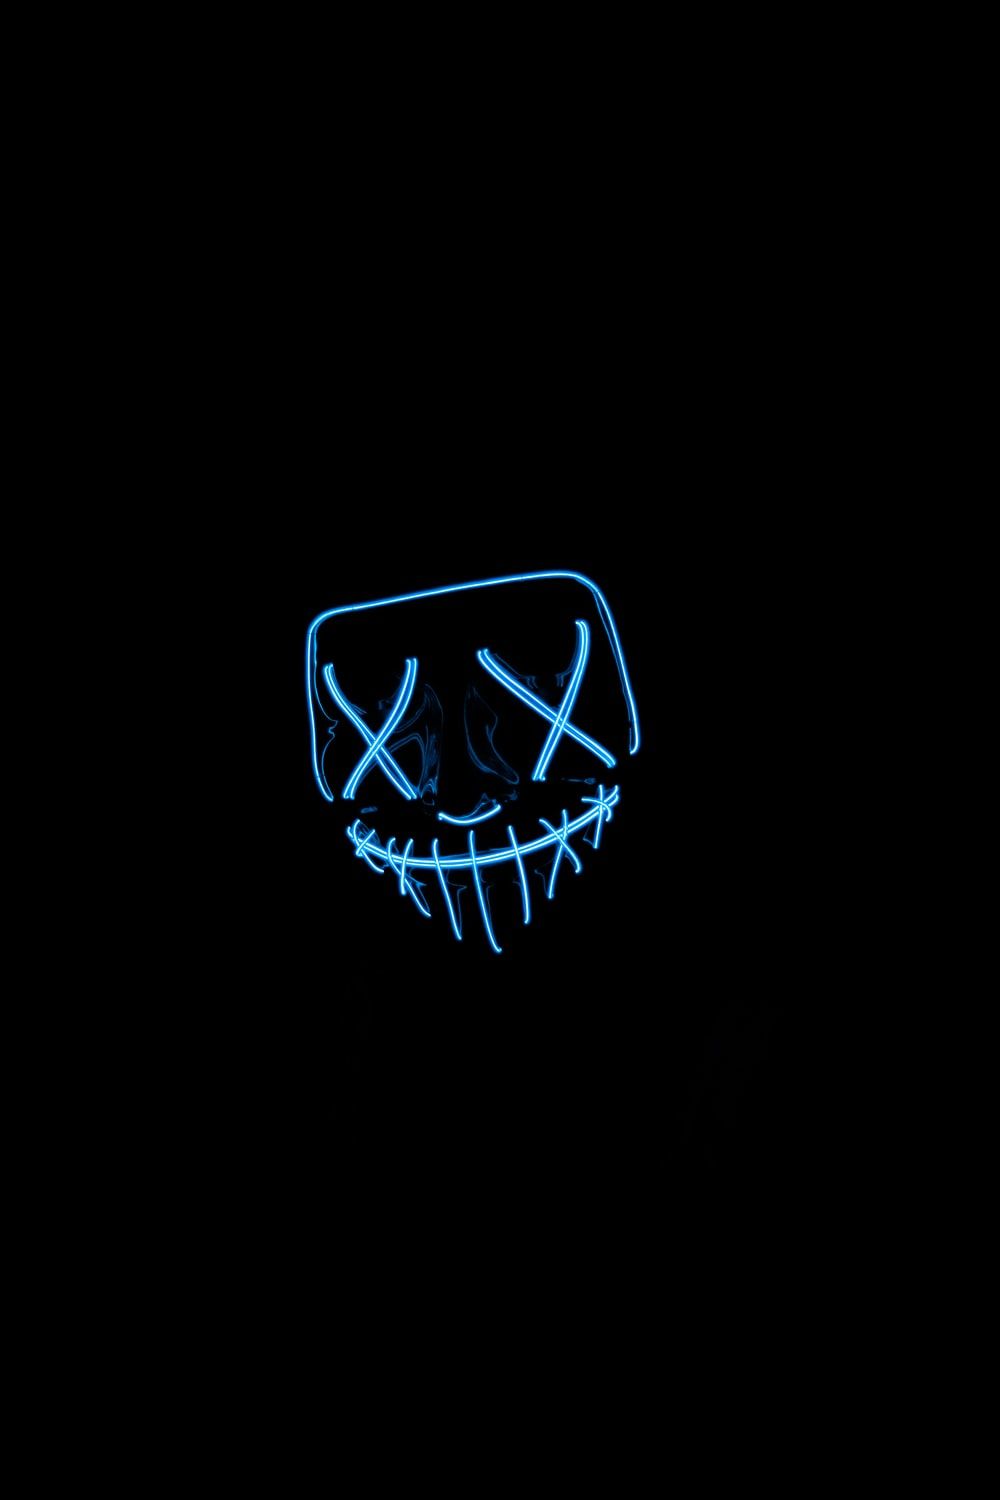 Neon Mask Picture. Download Free Image